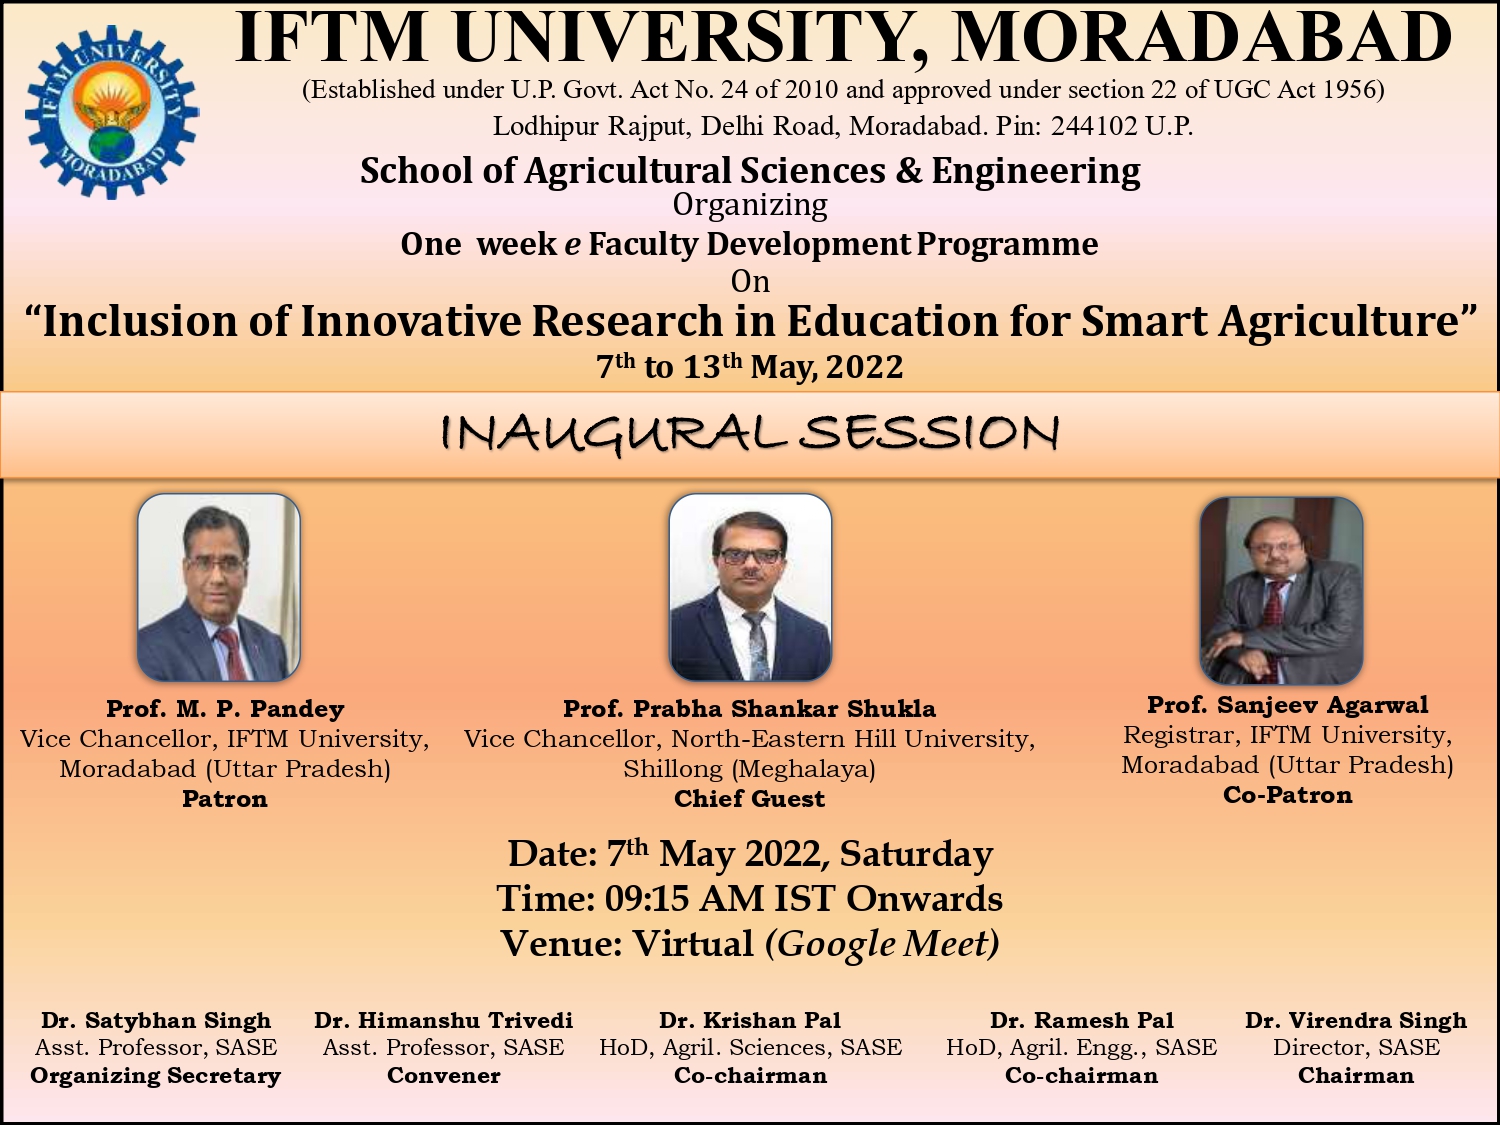 One week Faculty development programme on Inclusion of Innovative Research in Education for Smart Agriculture